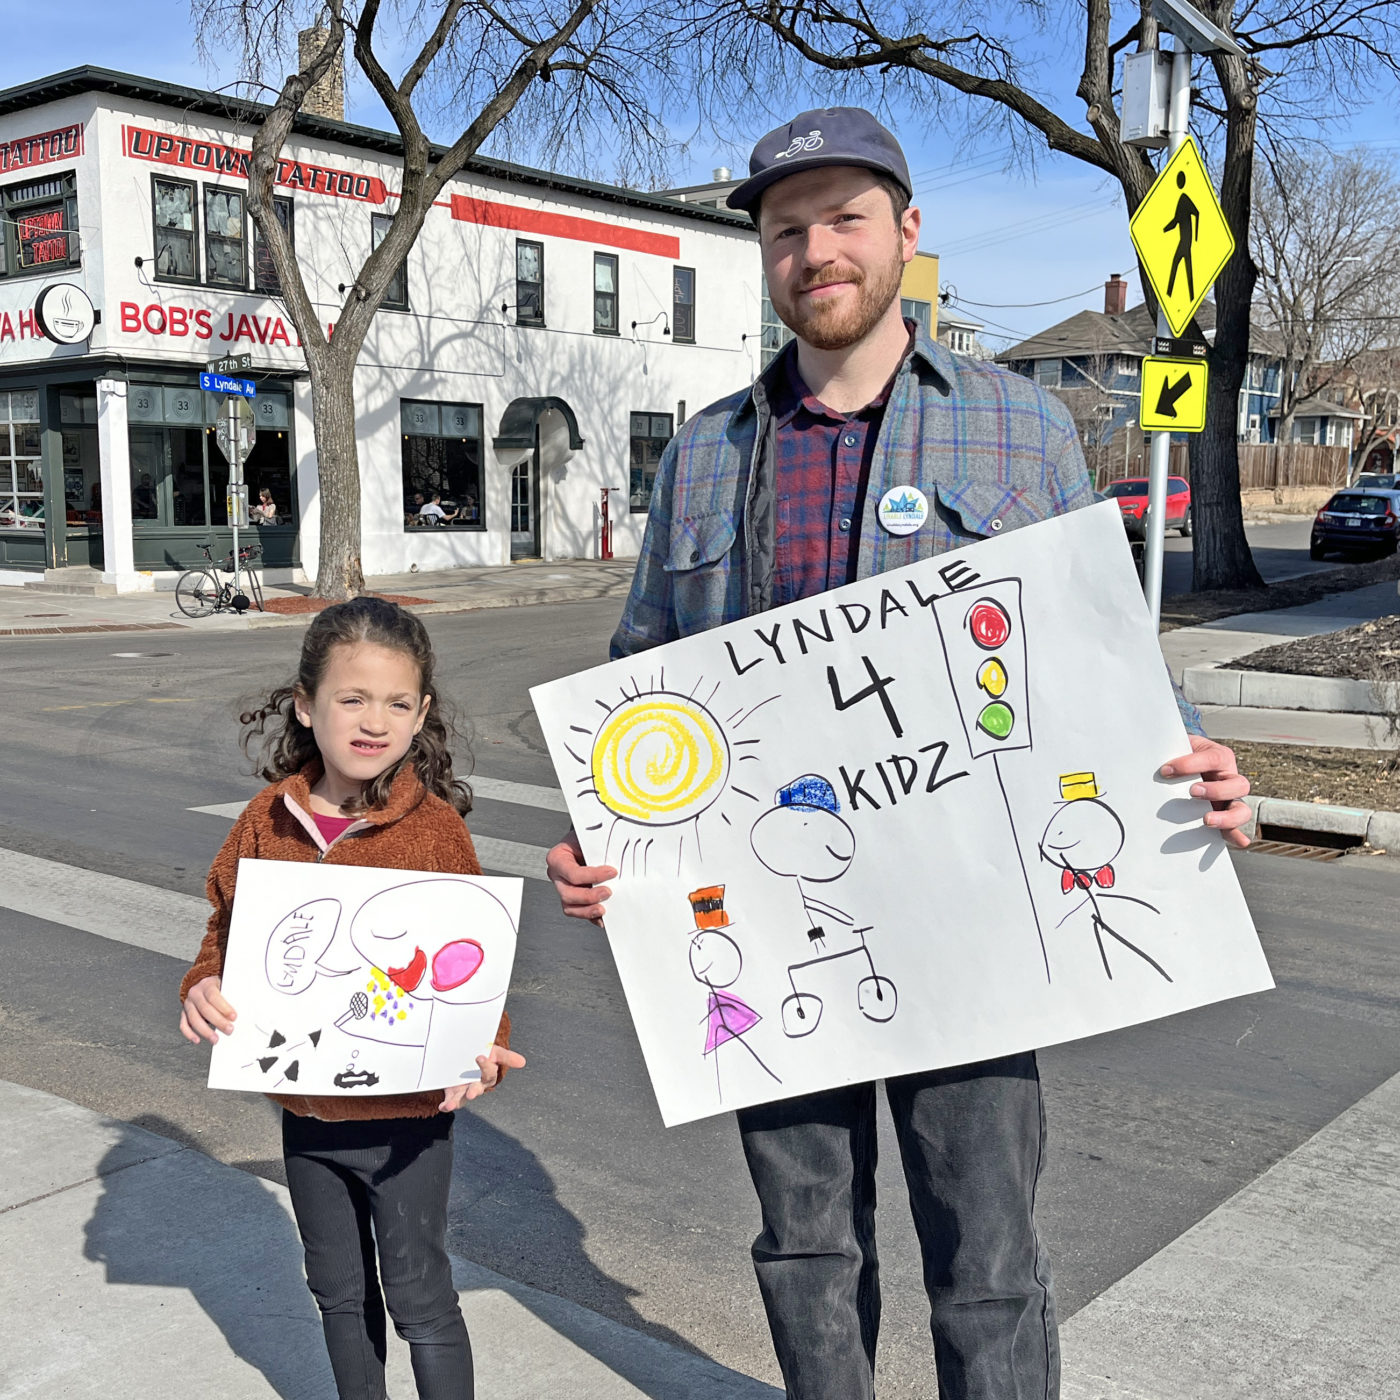 Phil Schwartz, a white man with a brown beard, stands next to his young daughter, Holly, with a sign that says "Lyndale 4 Kidz" over a drawing of stick figure people walking and riding bikes under a yellow sun